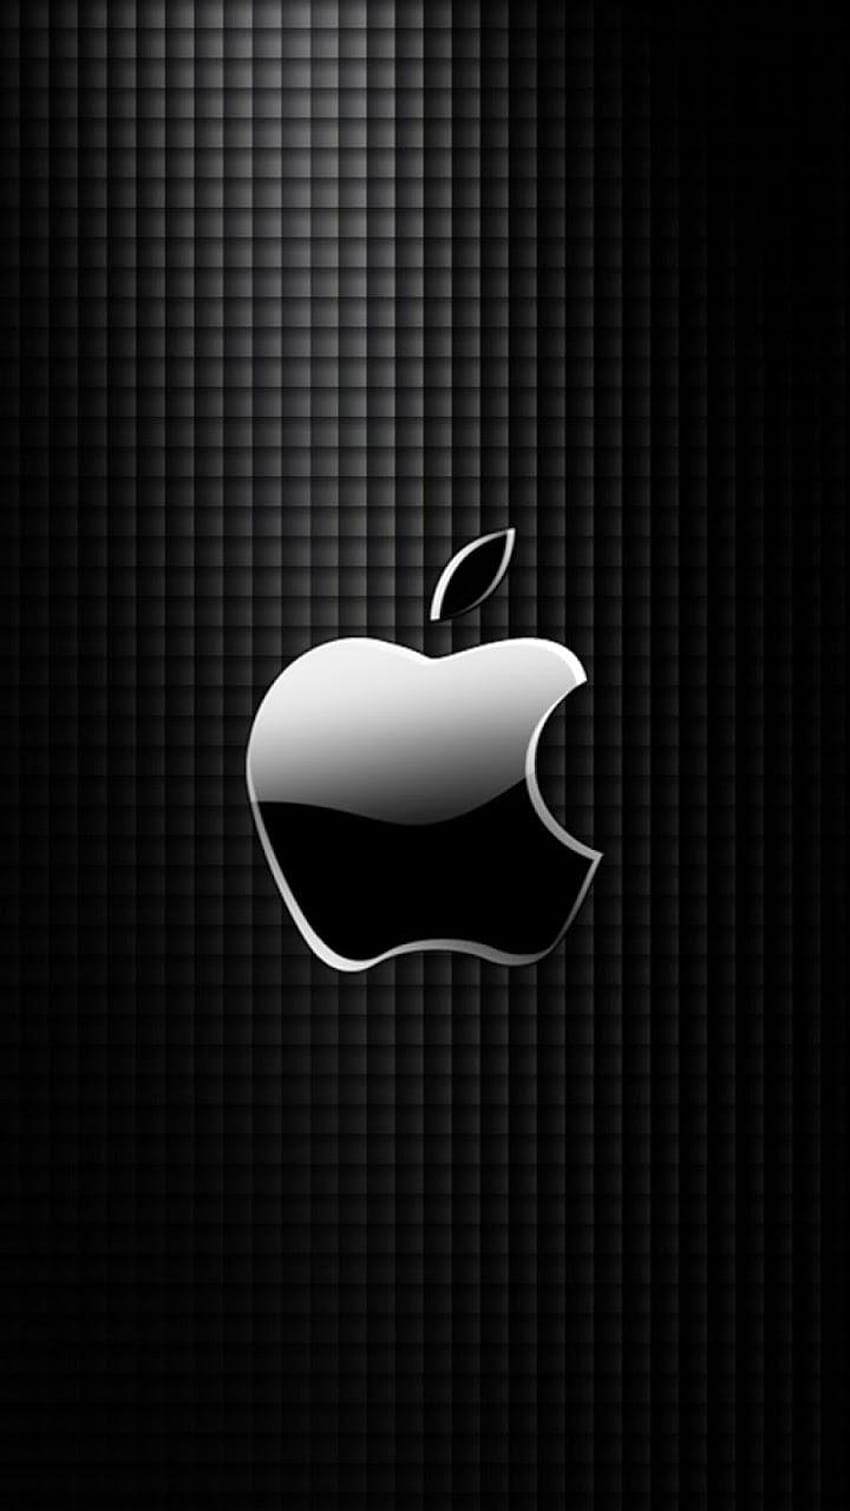 Android Best : Sleek Apple Logo with Black Grid, apple logo android HD ...